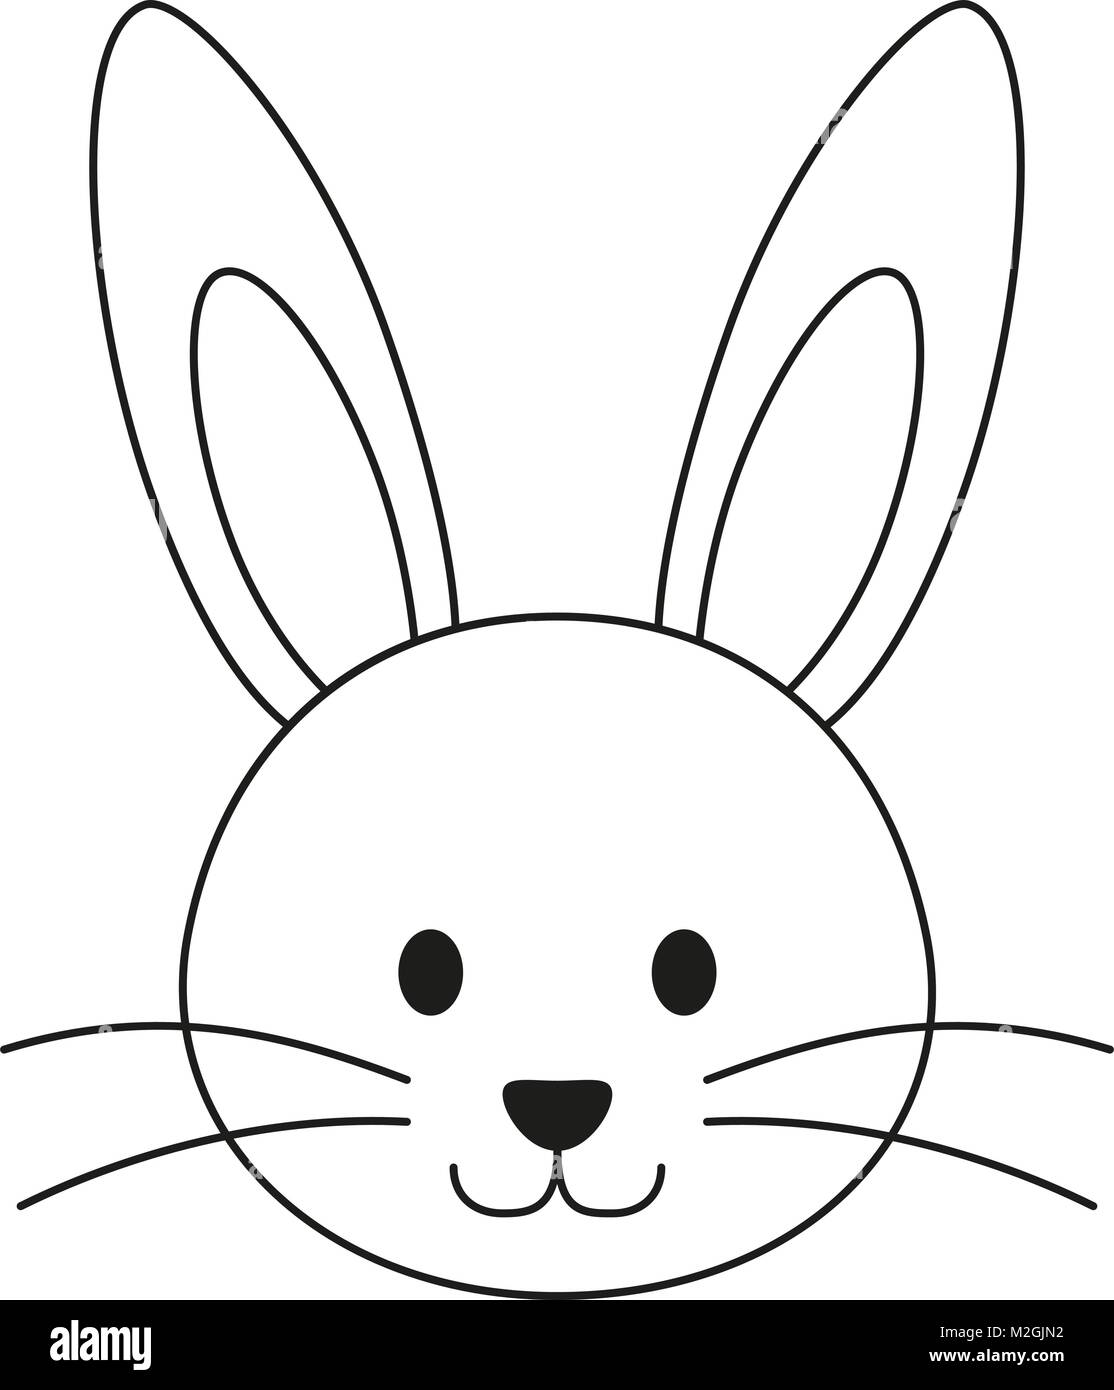 Line art black and white rabbit bunny face icon poster coloring book page for adults and kids easter themed vector illustration for gift card flyer stock vector image art